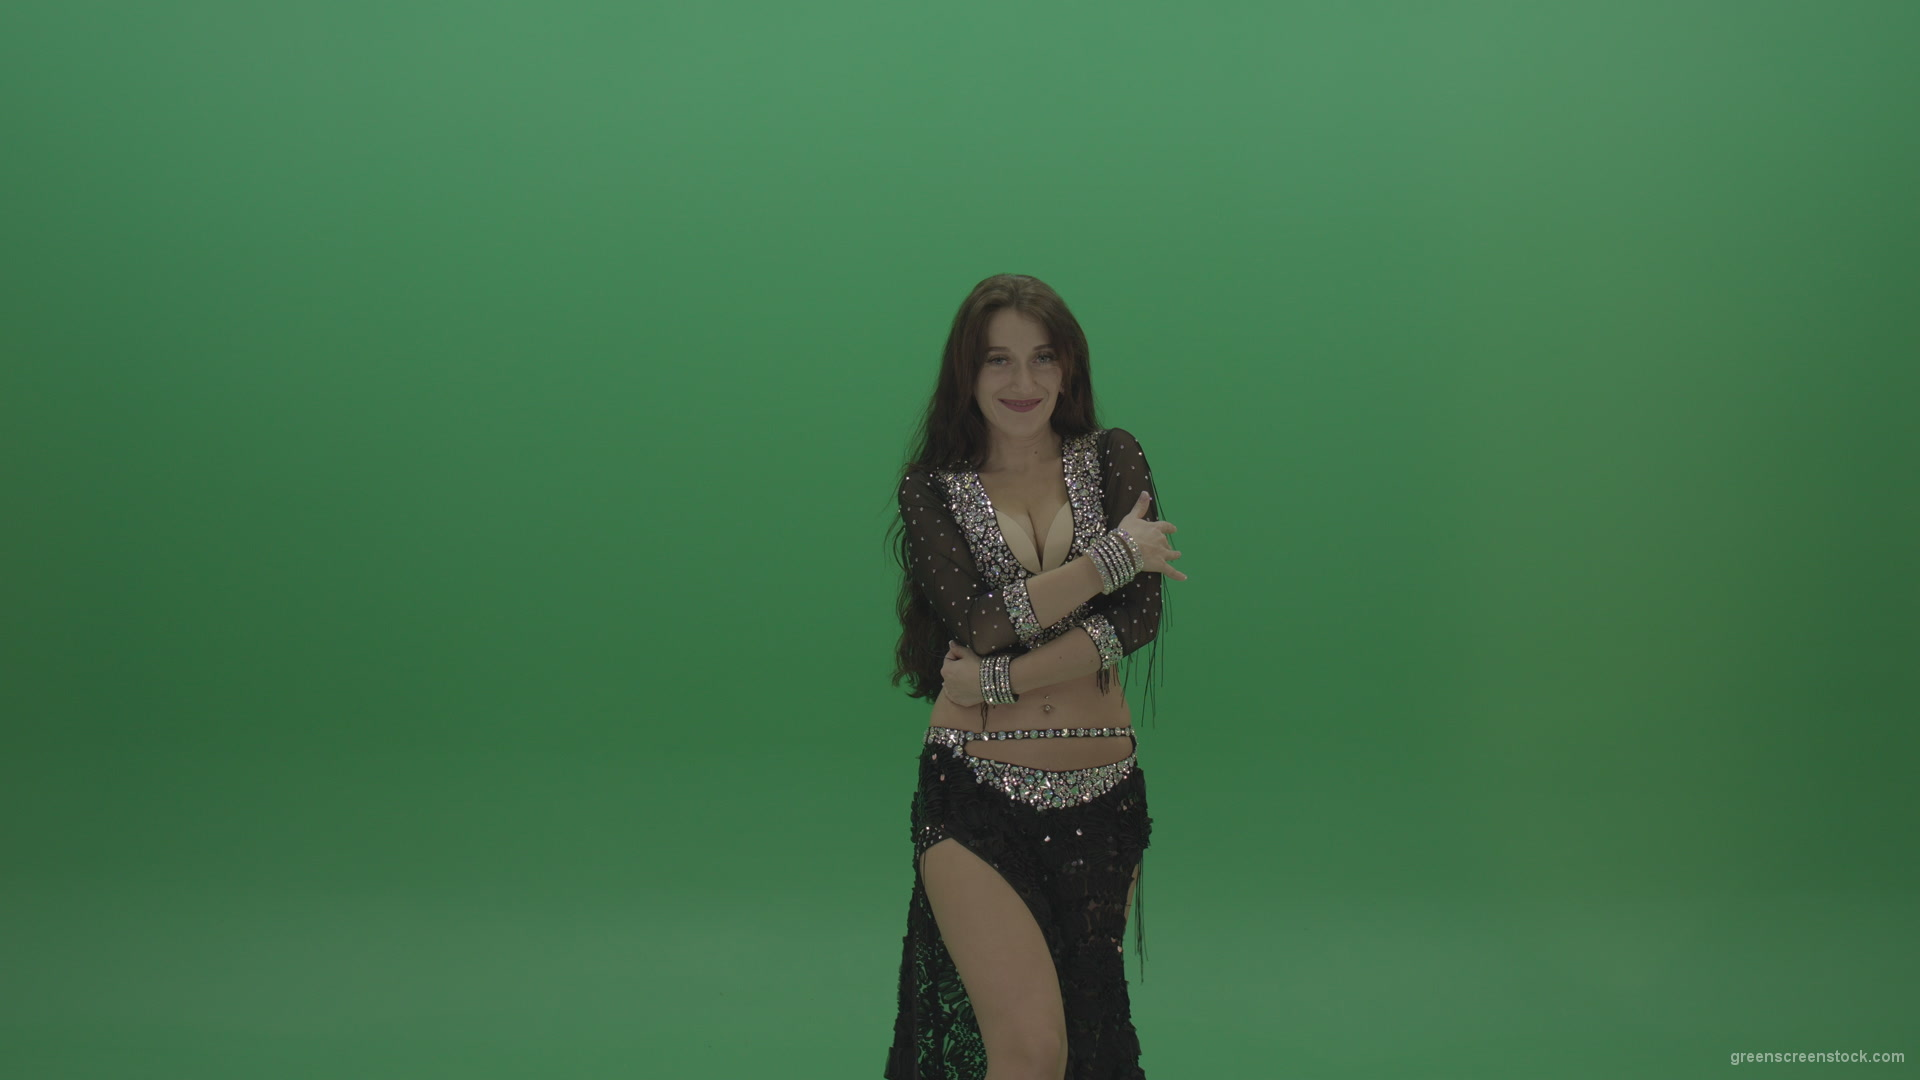 Refined-belly-dancer-in-black-wear-display-amazing-dance-moves-over-chromakey-background_002 Green Screen Stock